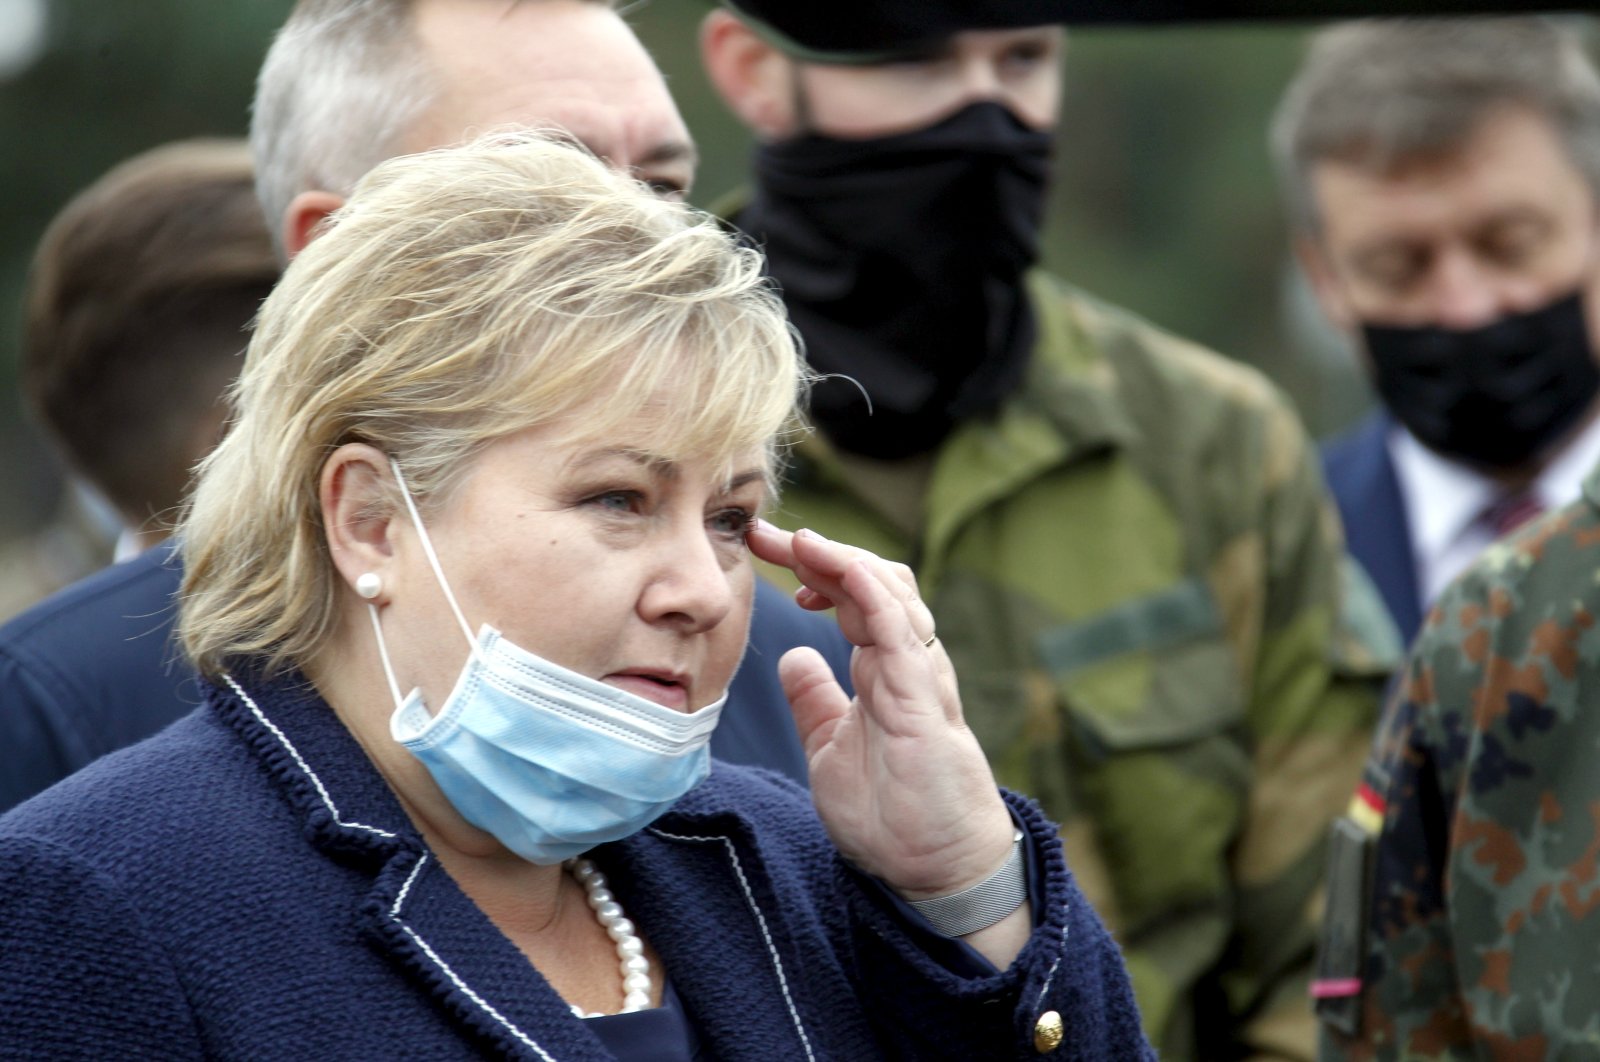 Norway's Prime Minister Erna Solberg during her visit to Pabrade military base in Lithuania, Sept. 8, 2020. (EPA-EFE Photo)